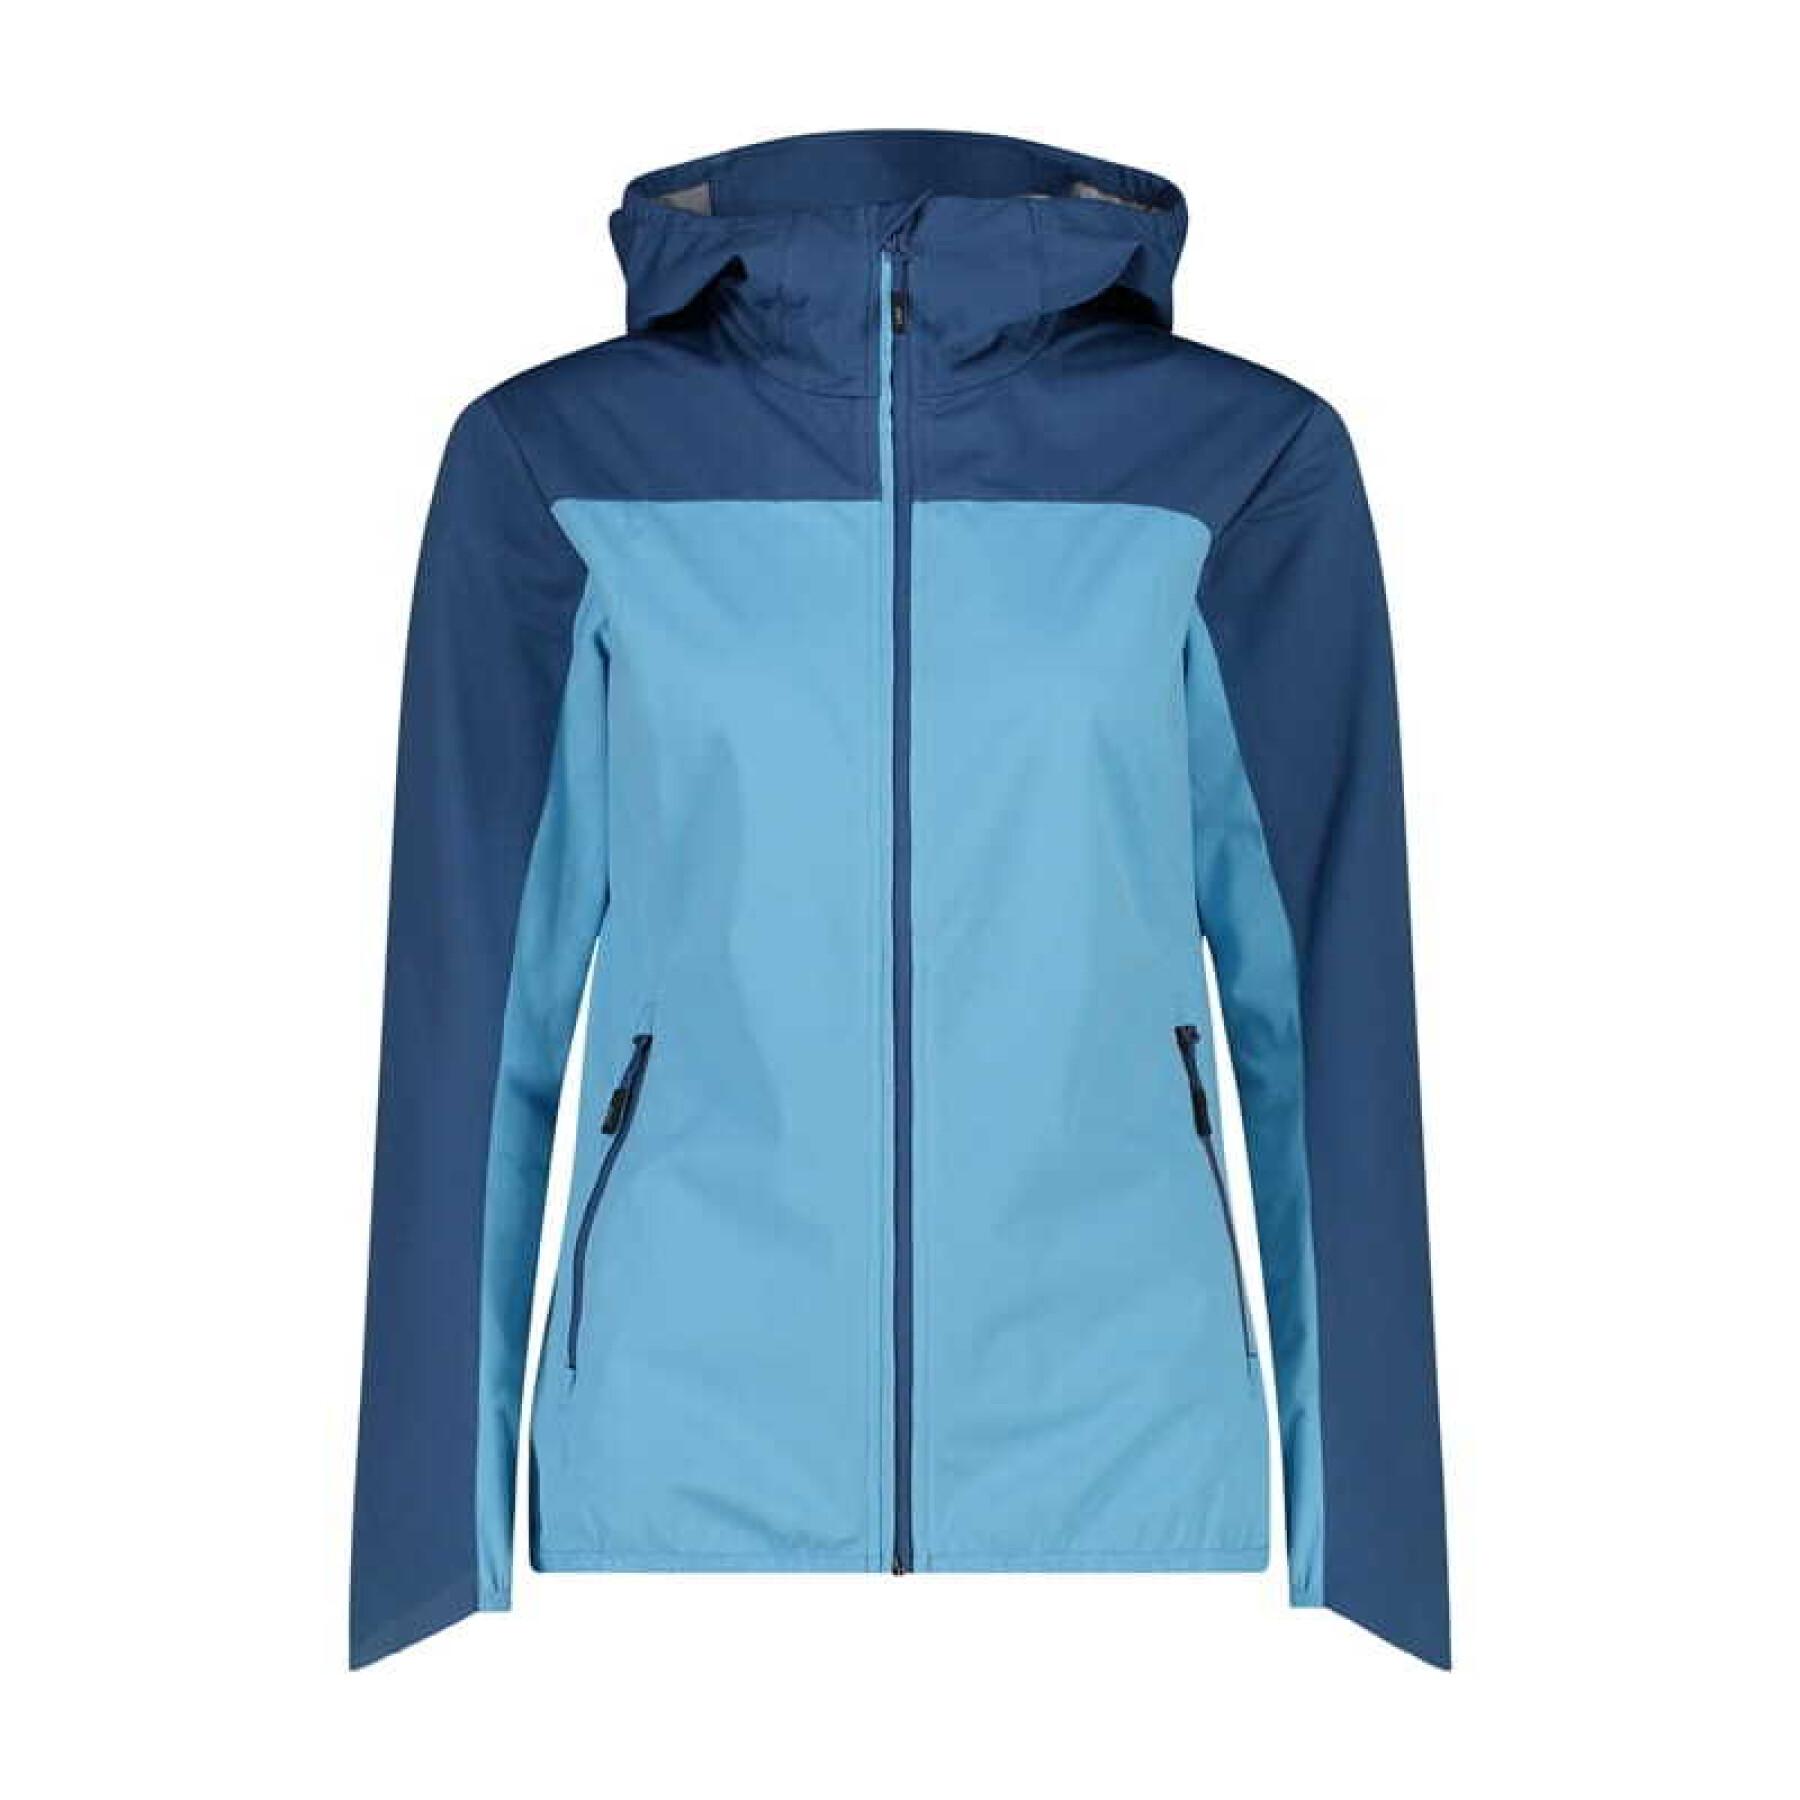 Women's hooded waterproof jacket CMP - Classic hiking - Practices - Hiking